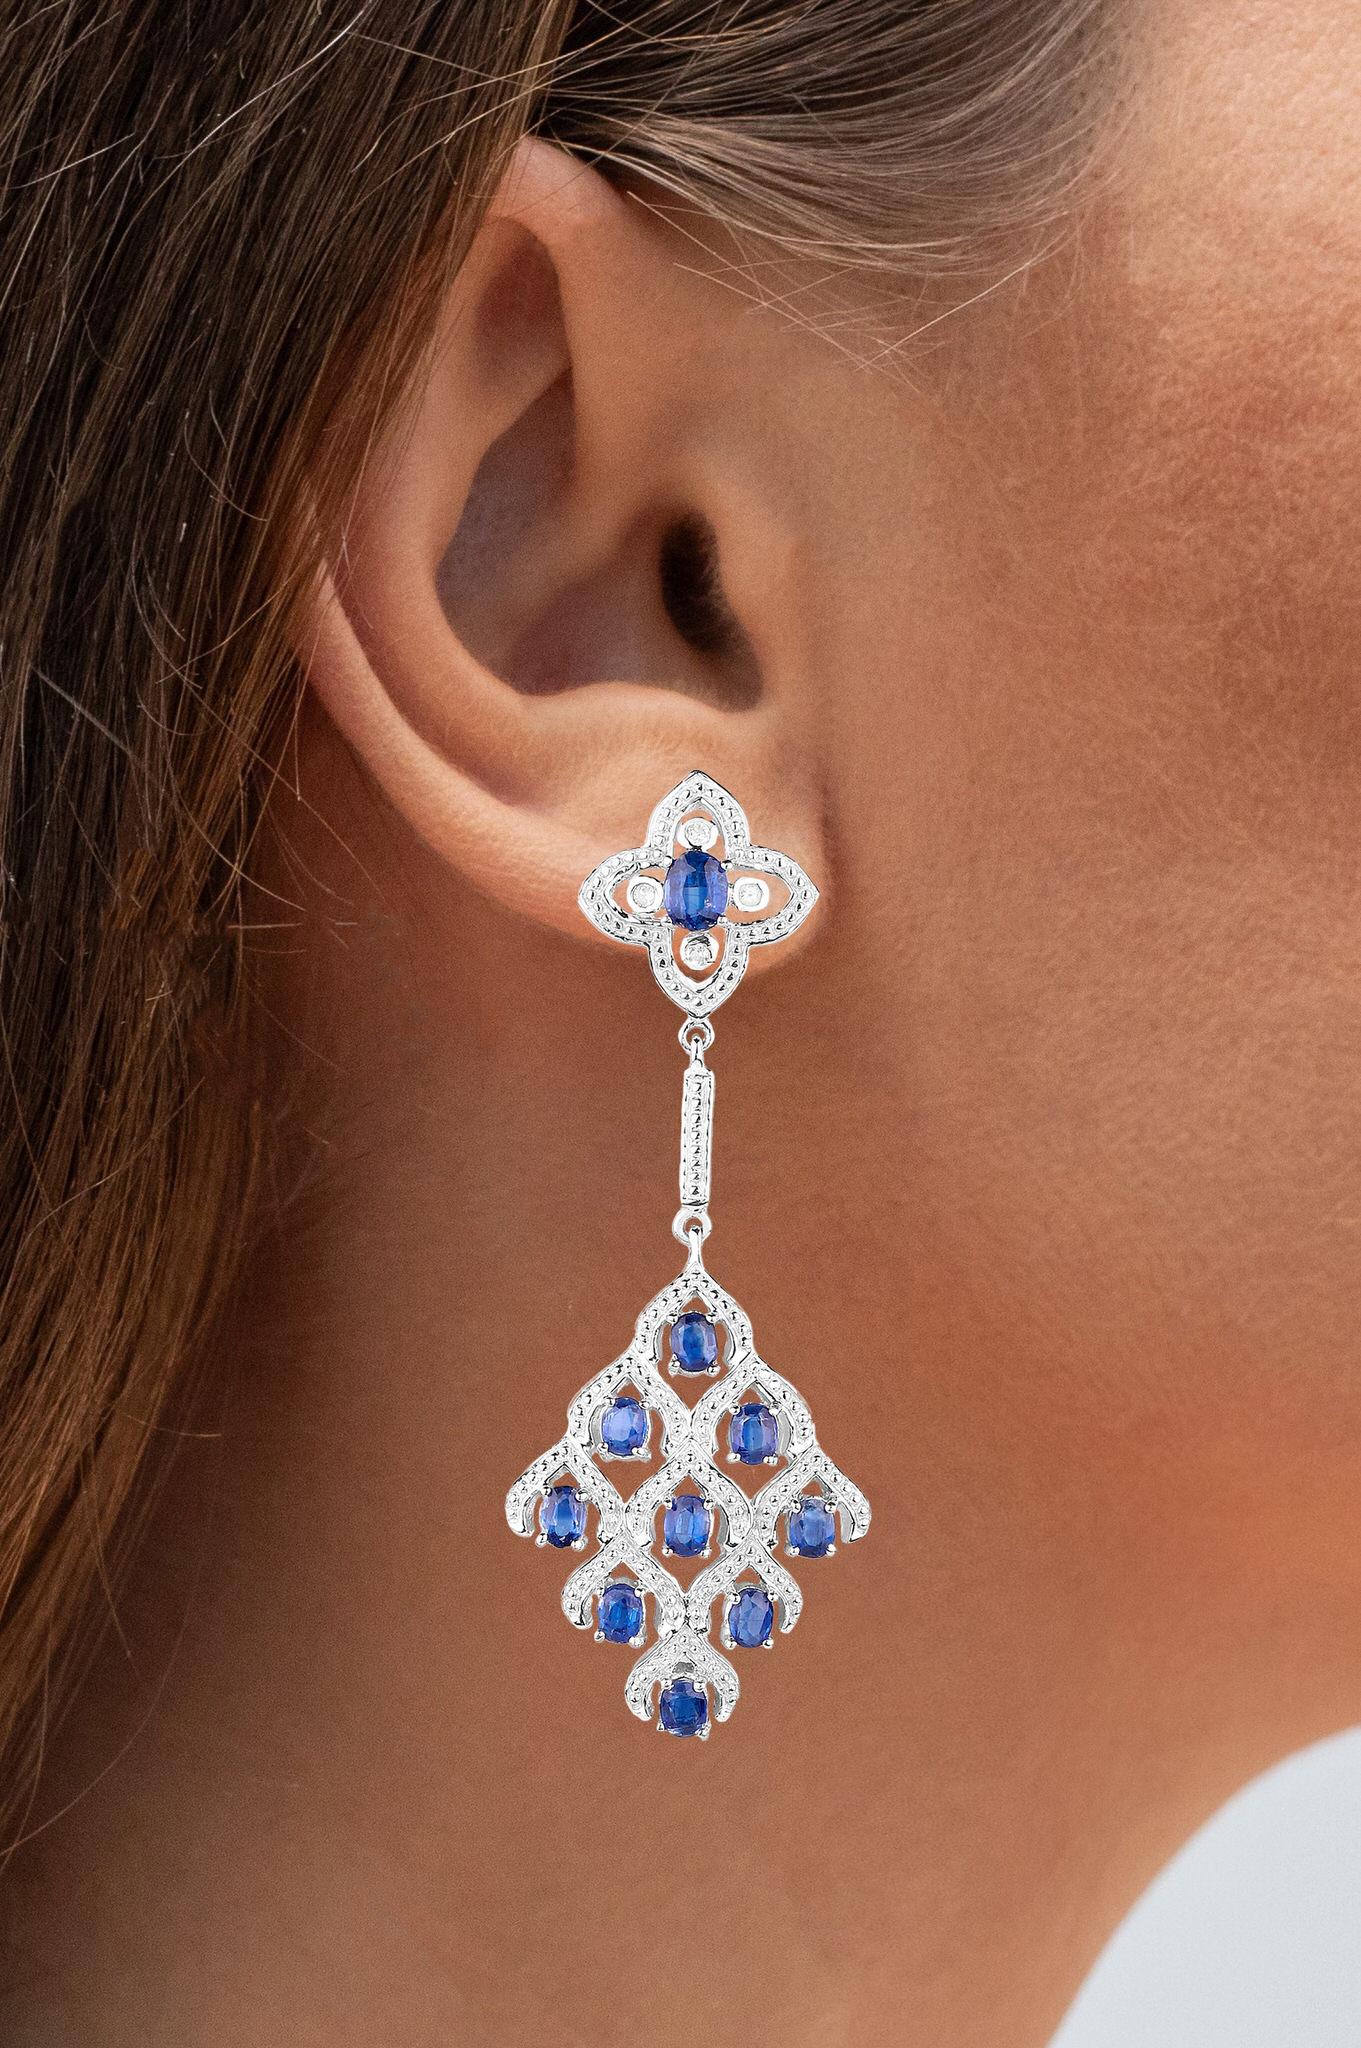 Contemporary Kyanite Chandelier Earrings With White Topaz 5.6 Carats Rhodium Plated Silver For Sale